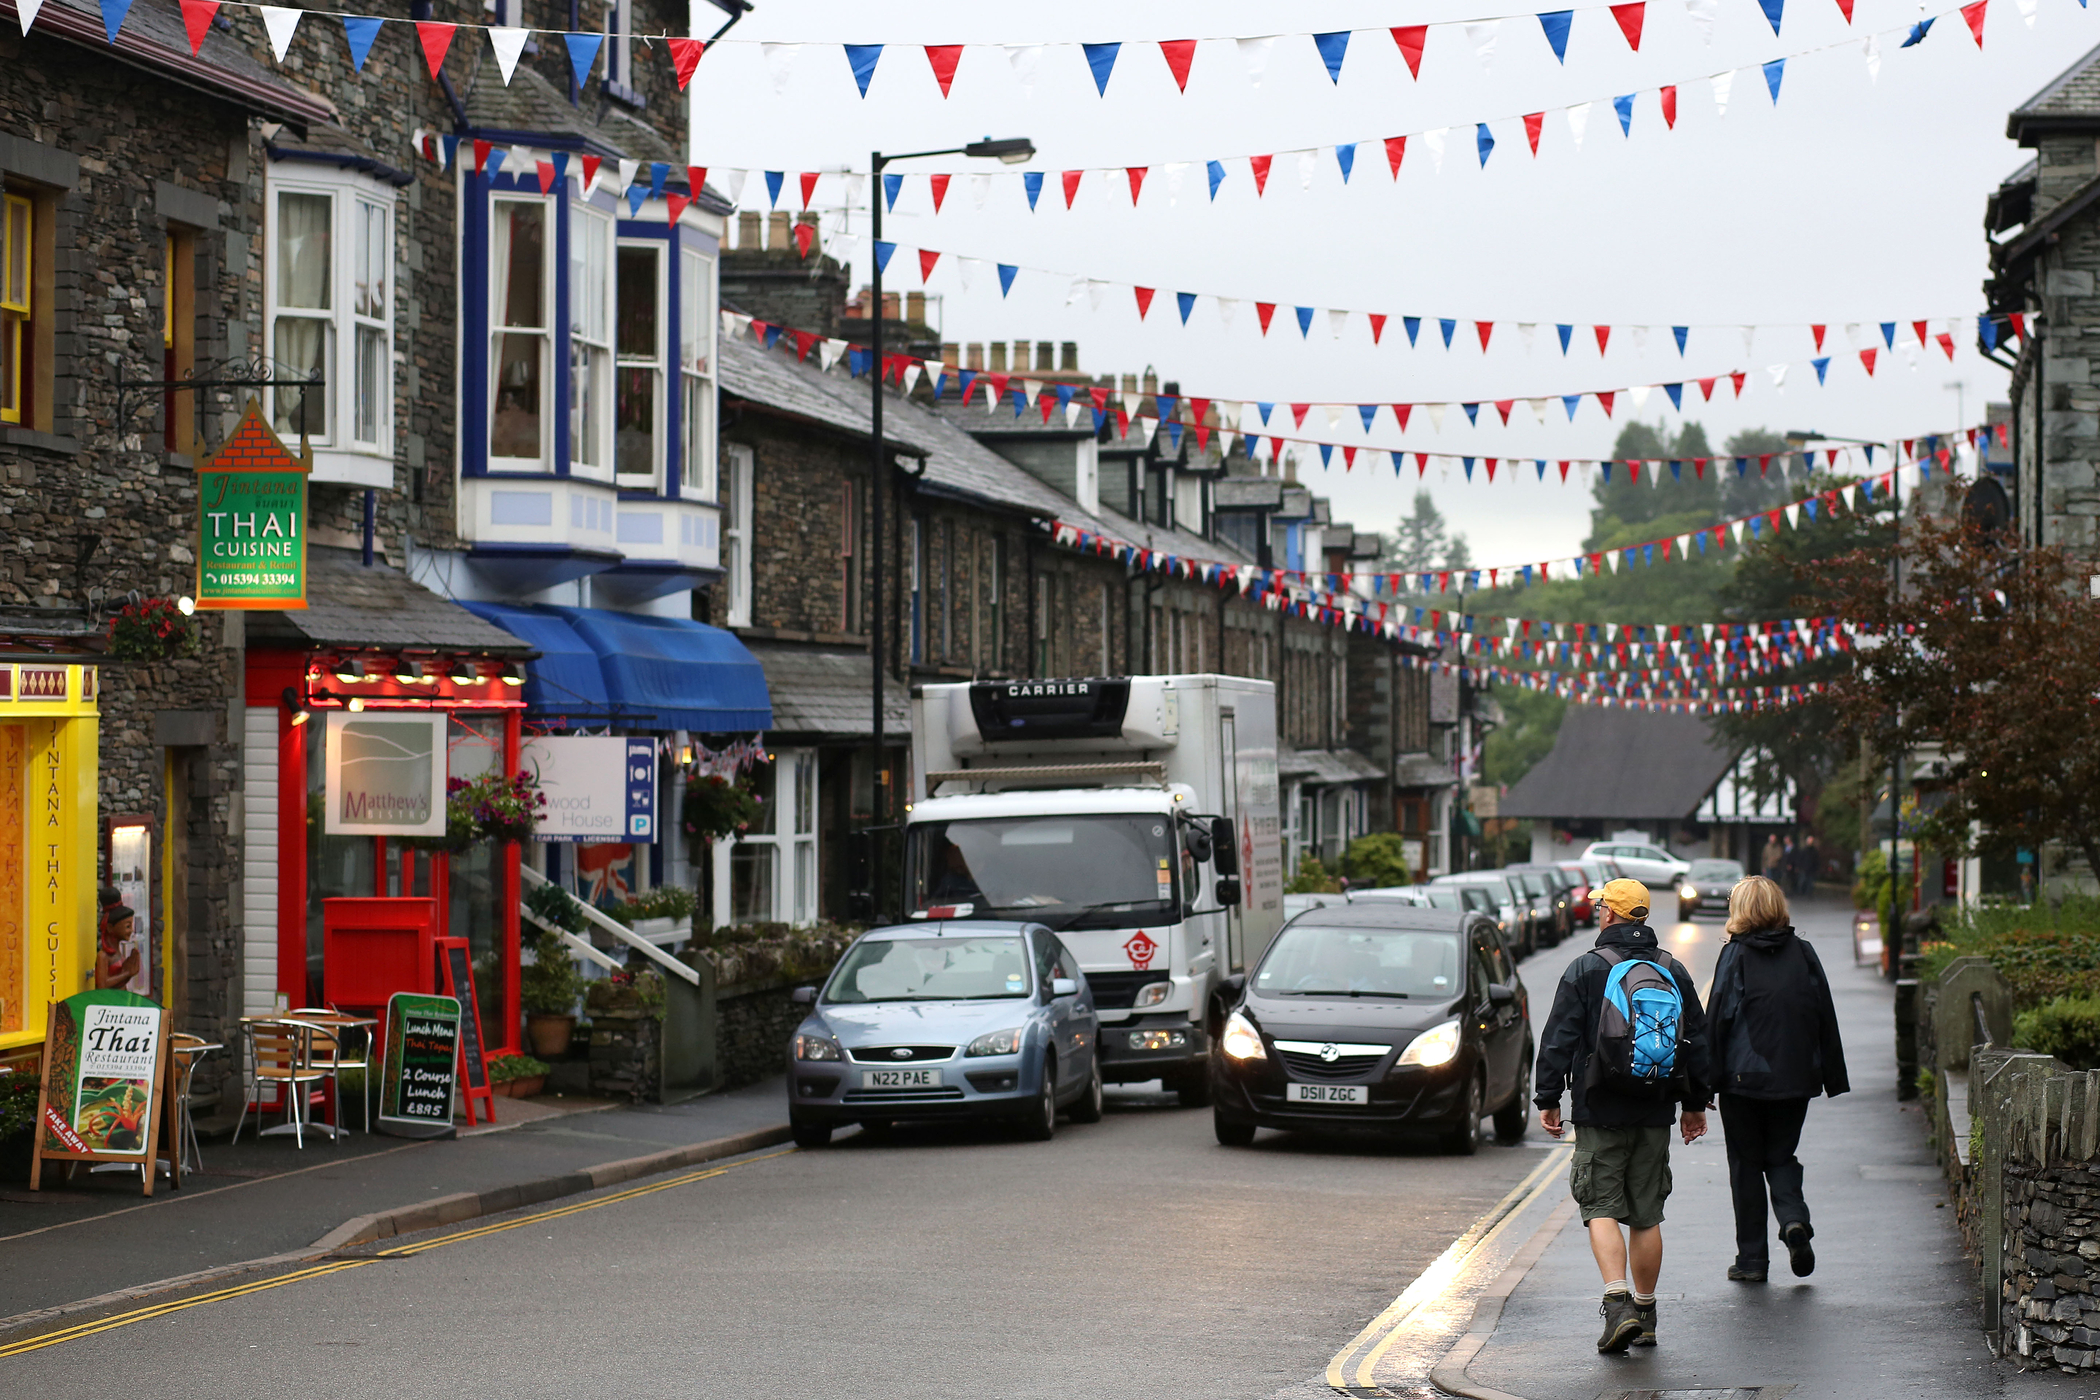 Get out and about in Ambleside